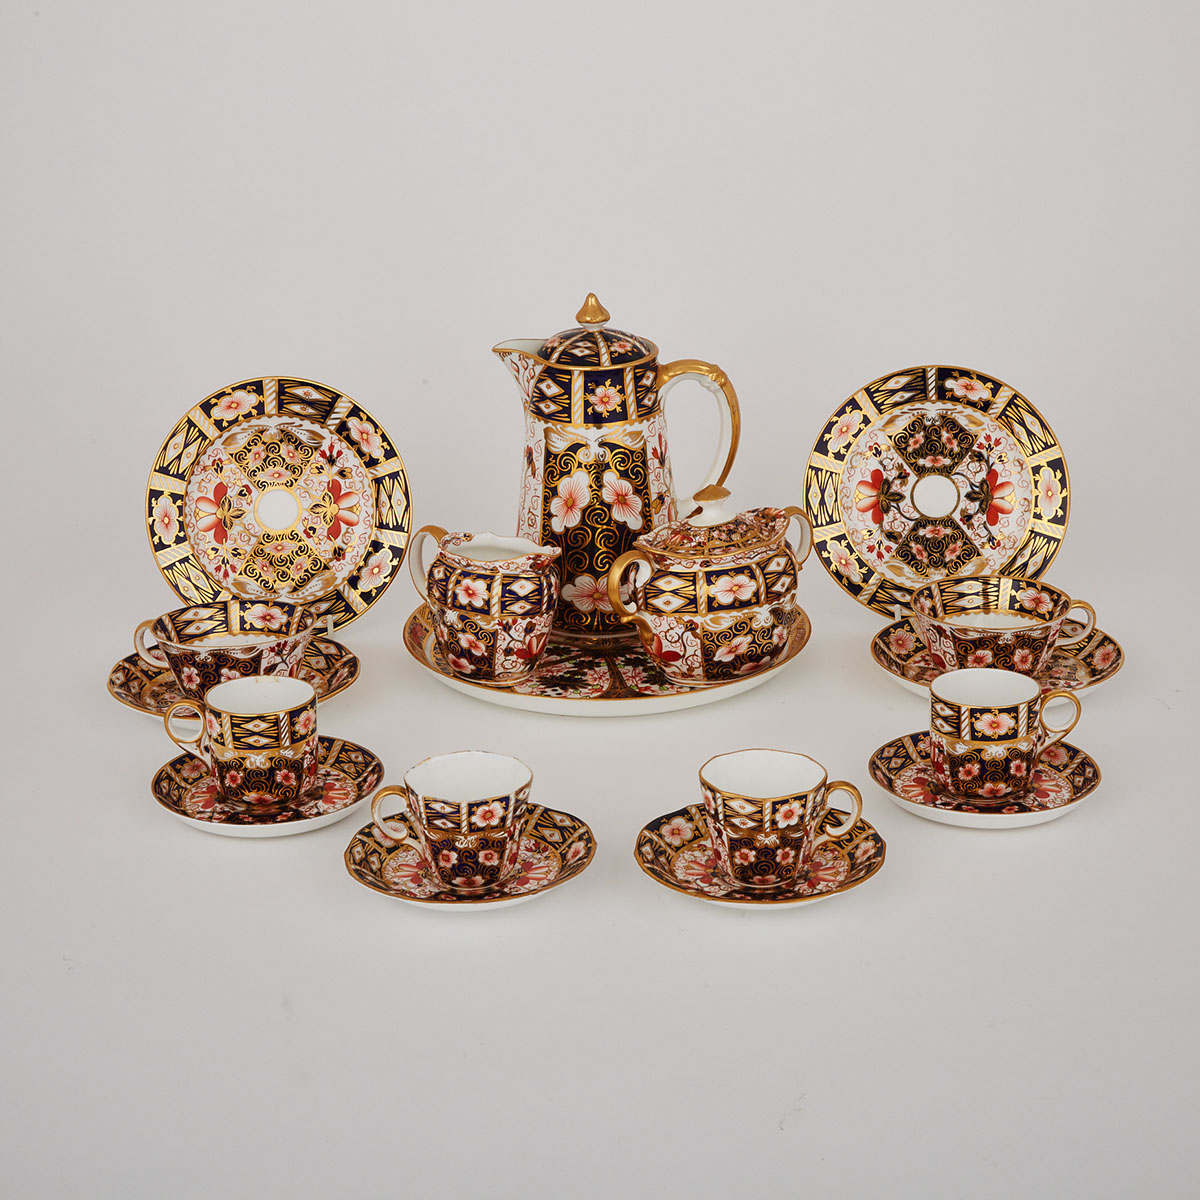 Group of Royal Crown Derby ‘Imari’ (2451 and 8711) Pattern Tablewares, 20th century